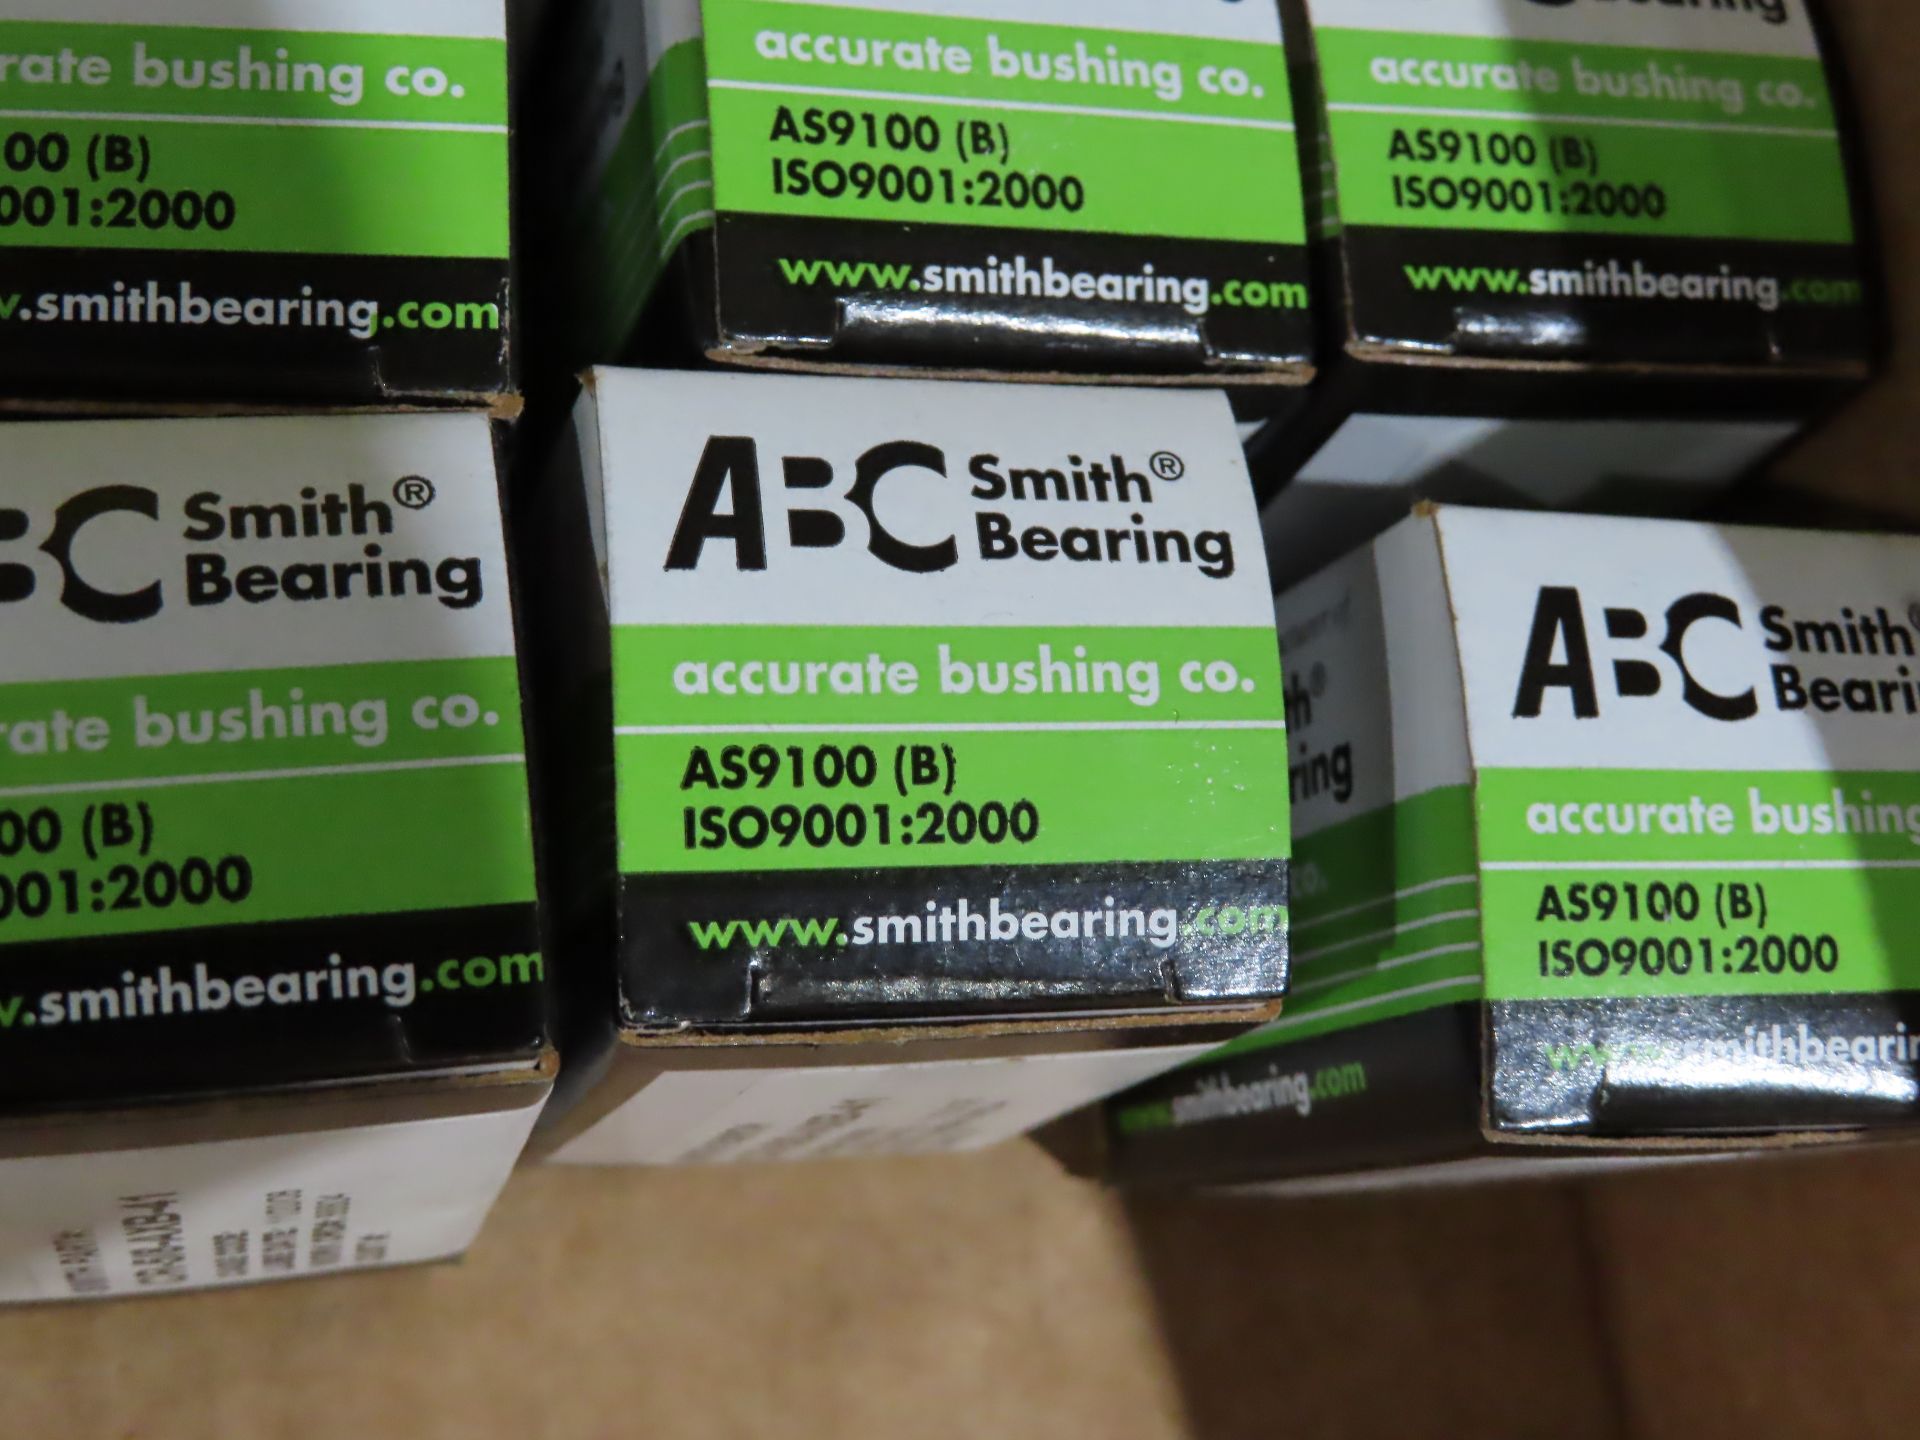 Qty 30 ABC Smith Bearing model AS9100(B), new in box, as always with Brolyn LLC auctions, all lots c - Image 2 of 2